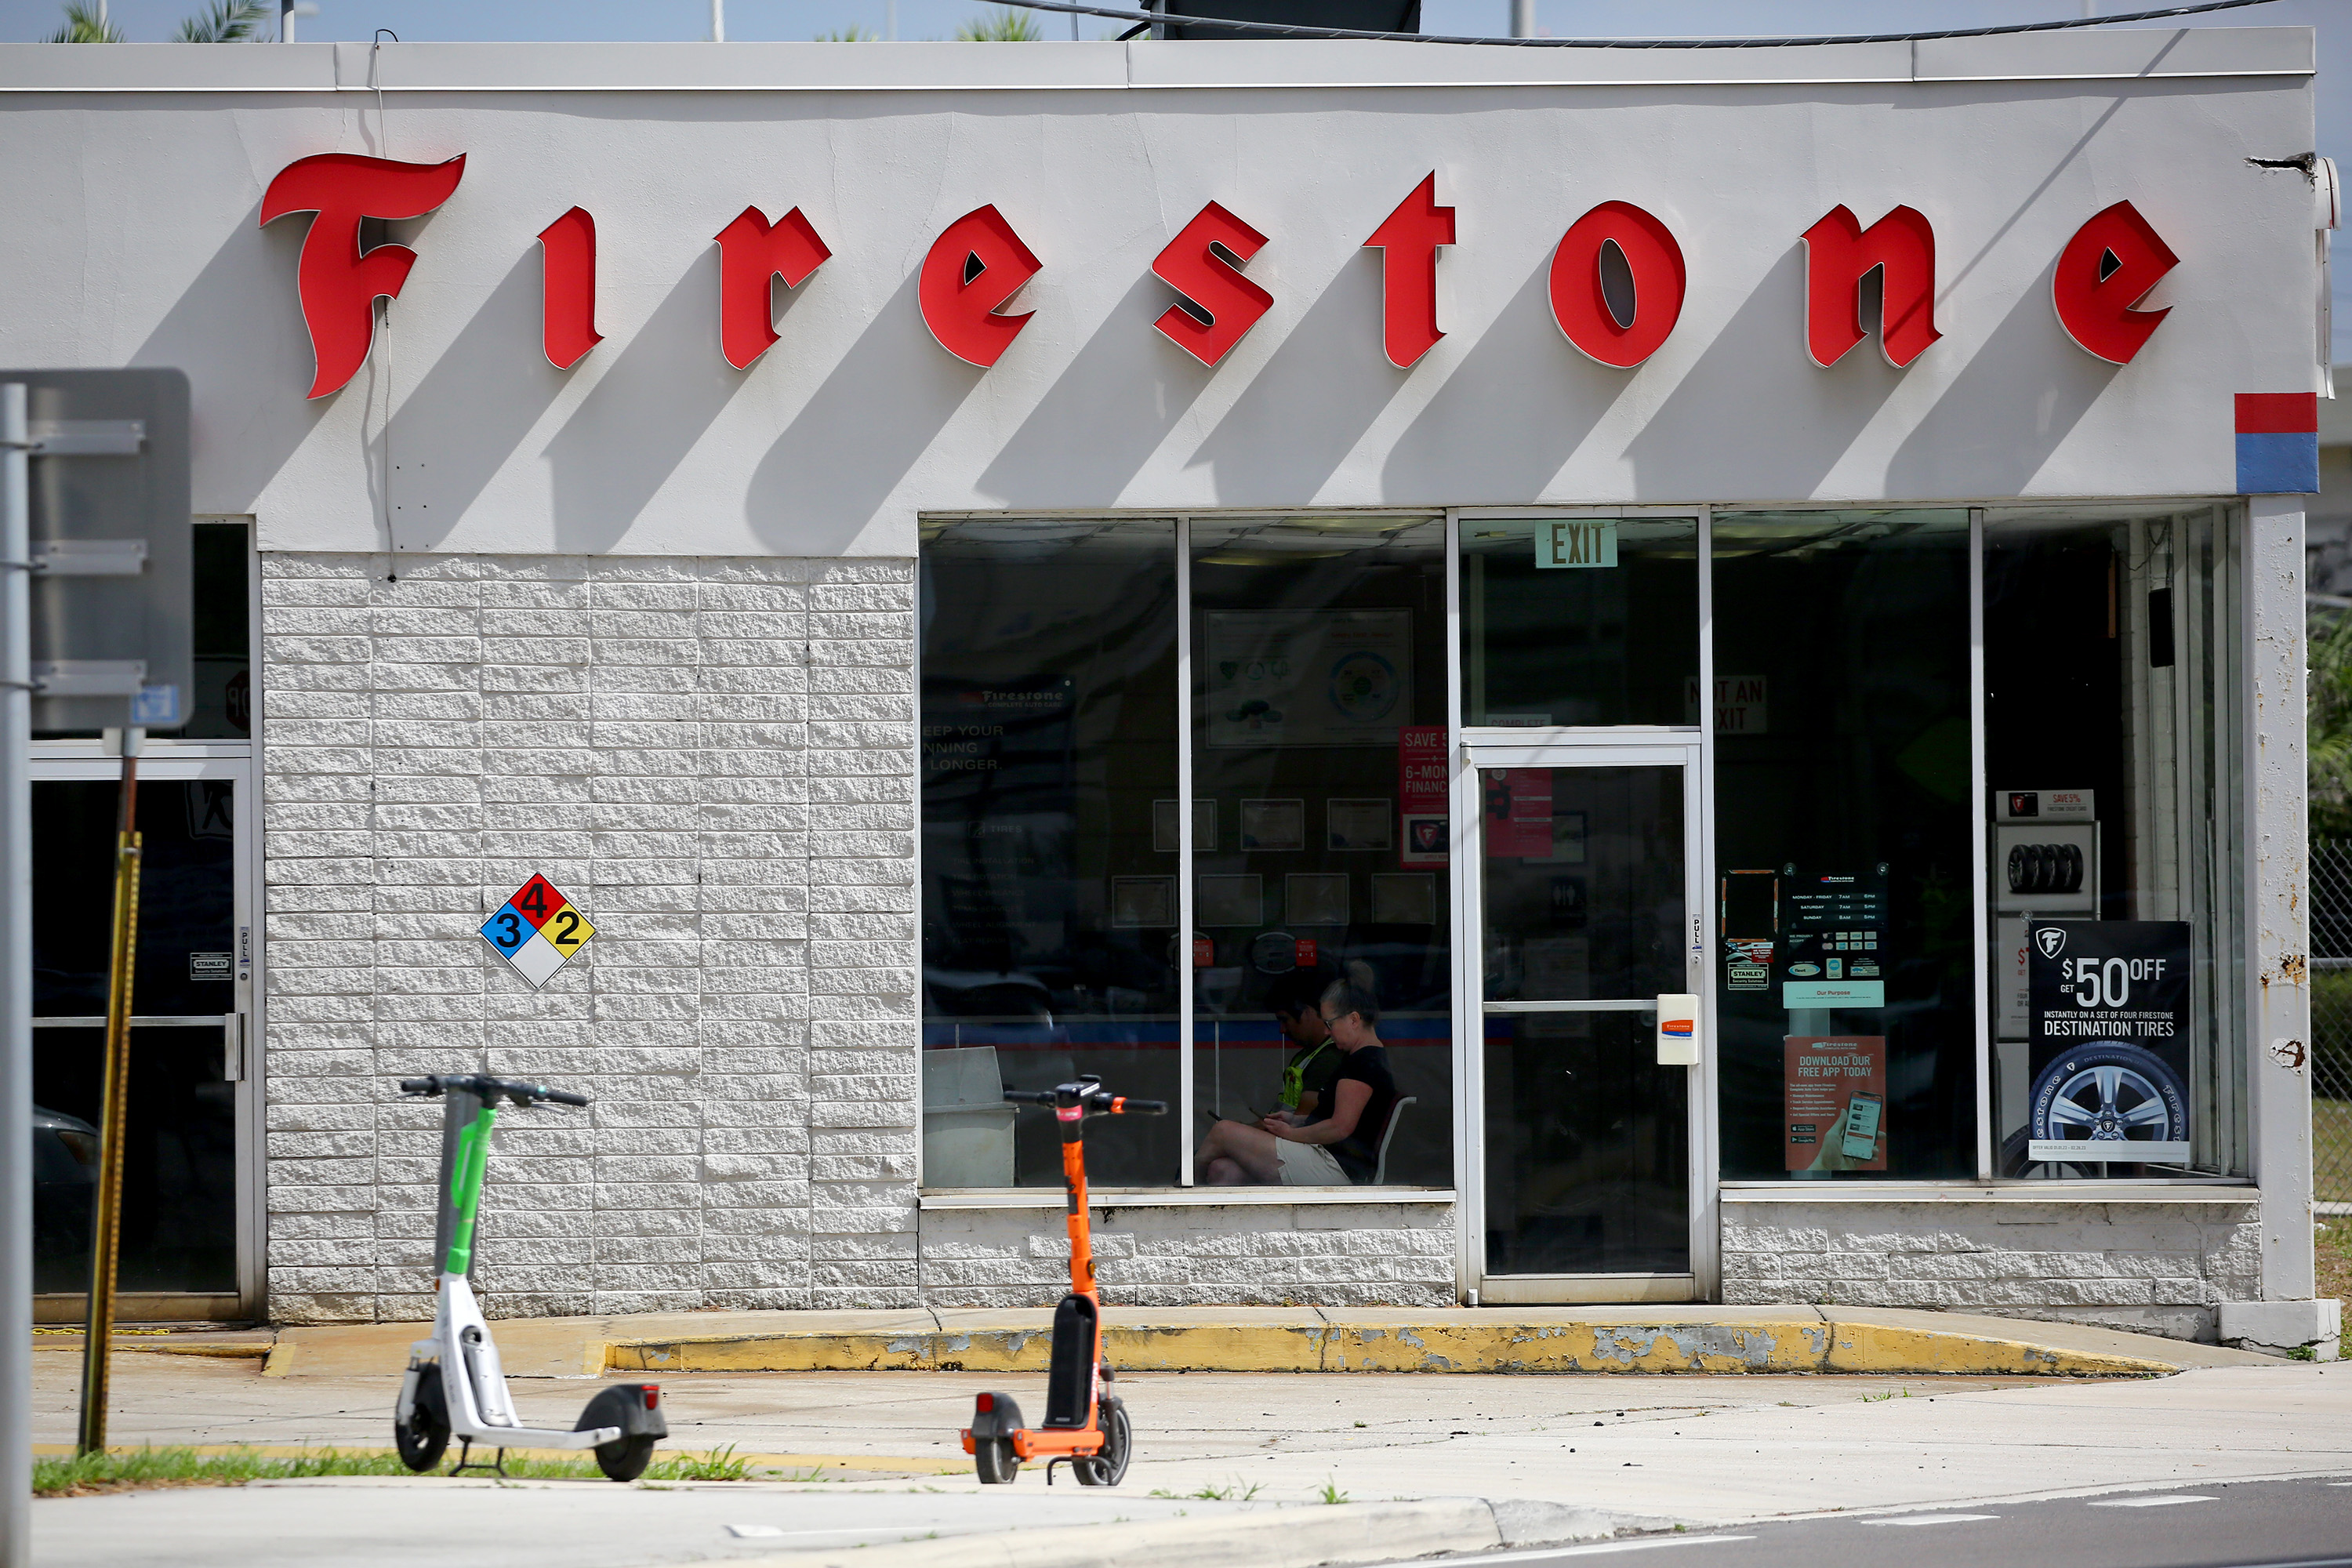 After nearly a century of fixing Tampa's flat tires, downtown Firestone  closes